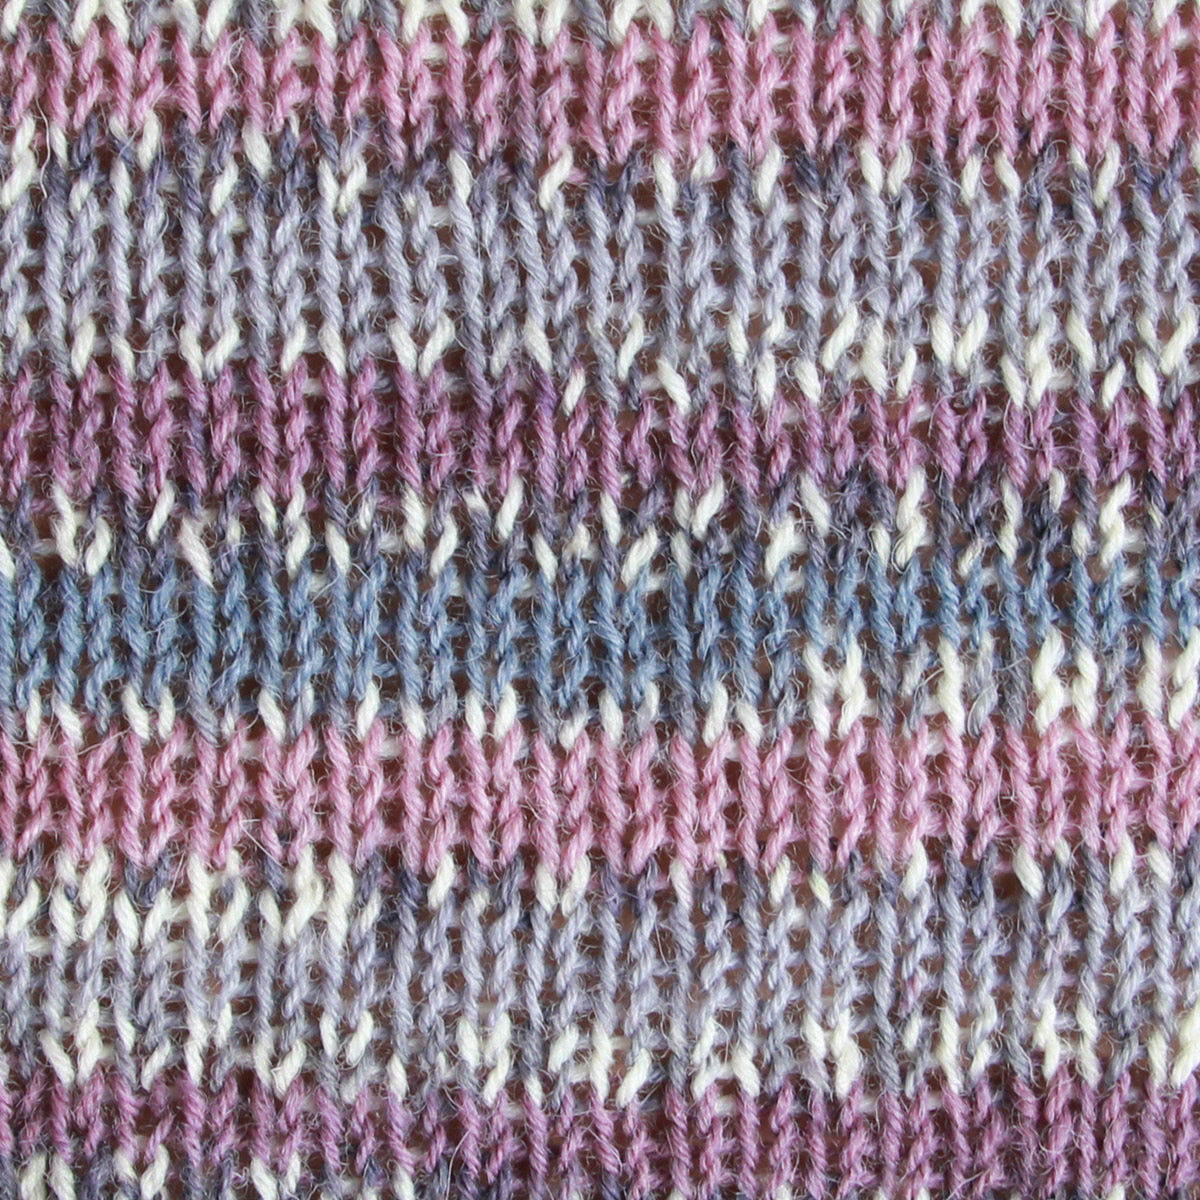 West Yorkshire Spinners Signature 4ply - Country Birds Range